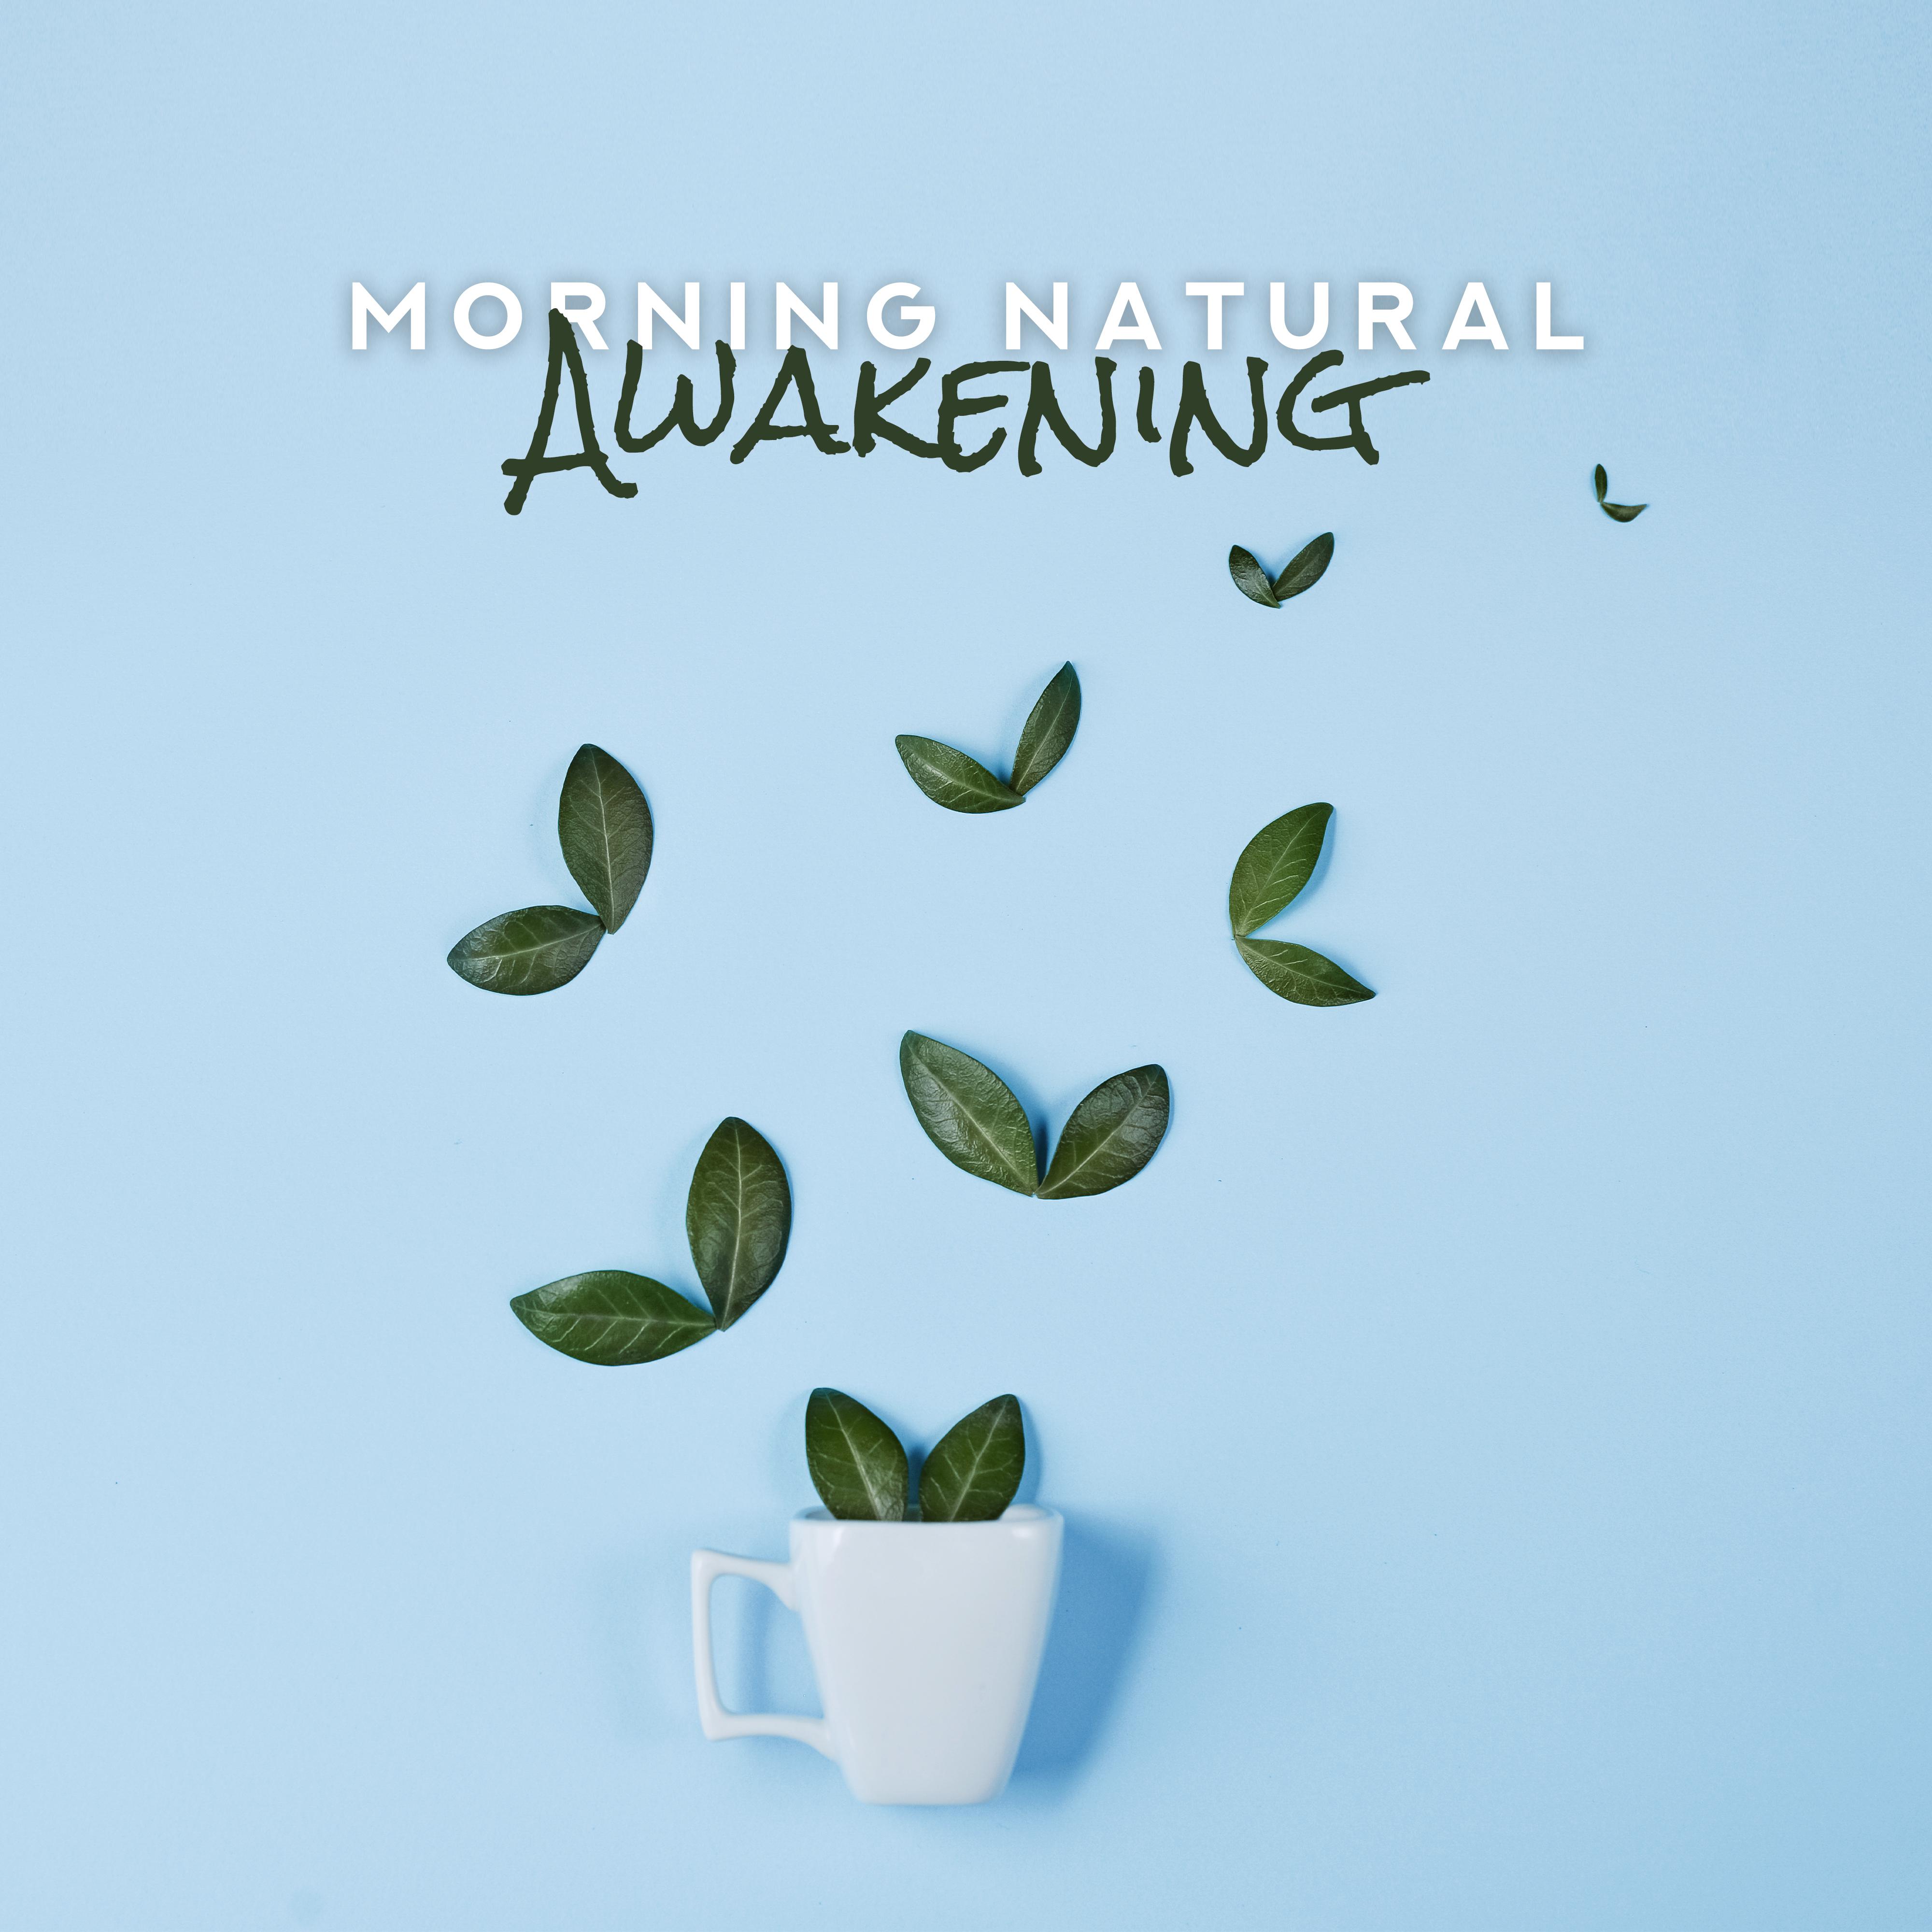 Morning Natural Awakening: 2019 Collection of New Age Ambient & Nature Music for Perfect Start a Day, Natural Sounds for Morning Yoga Training & Contemplation, Vital Energy Increase